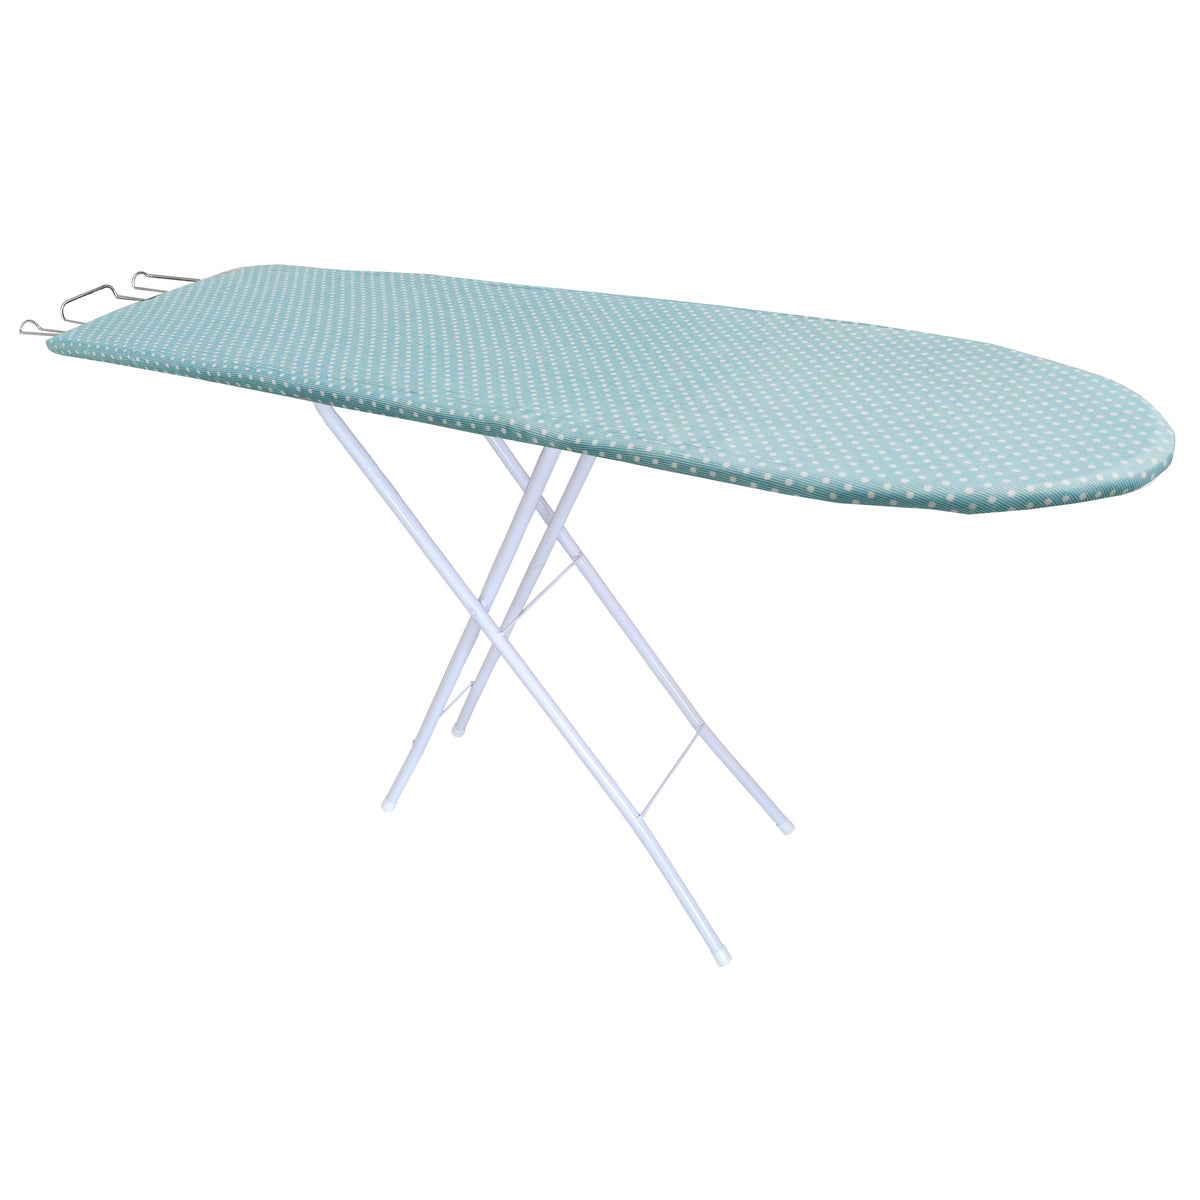 48" x 12" Wooden Ironing Board (4)